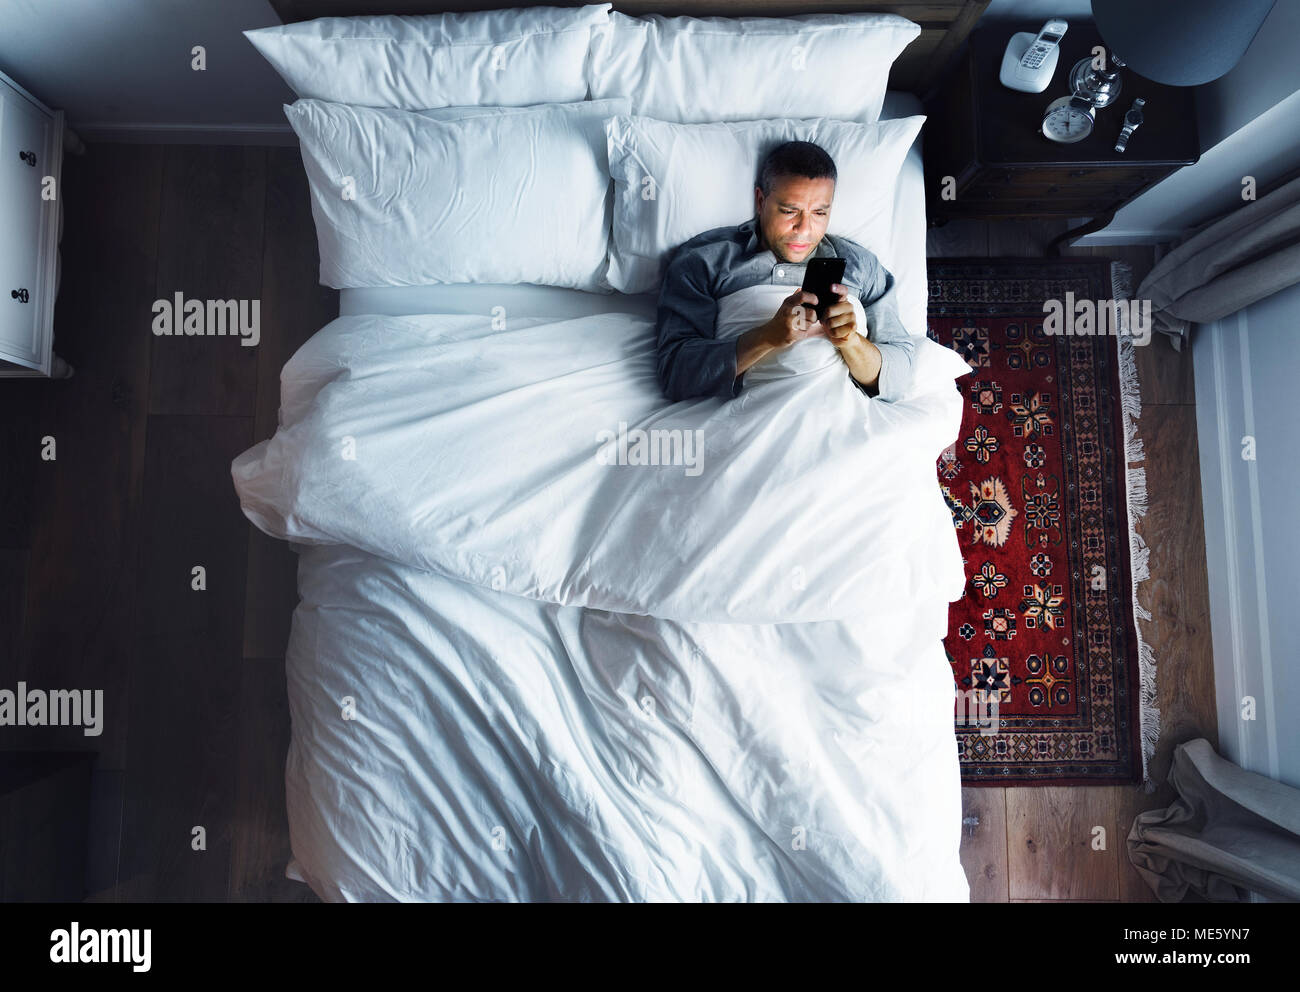 Man on bed using his cellphone Stock Photo